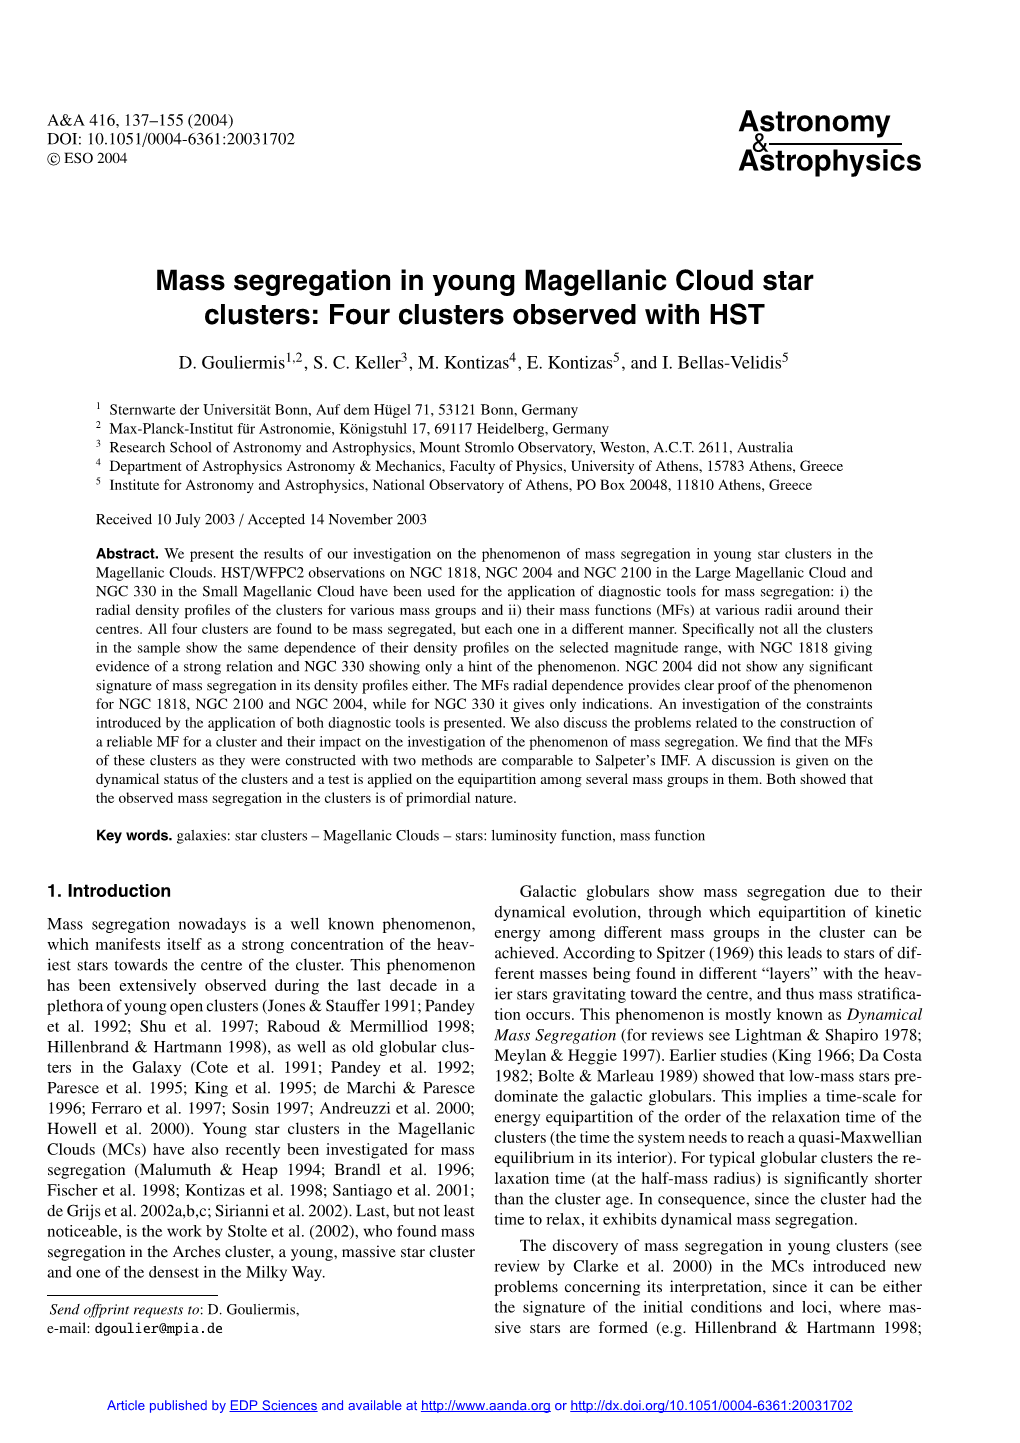 Mass Segregation in Young Magellanic Cloud Star Clusters: Four Clusters Observed with HST